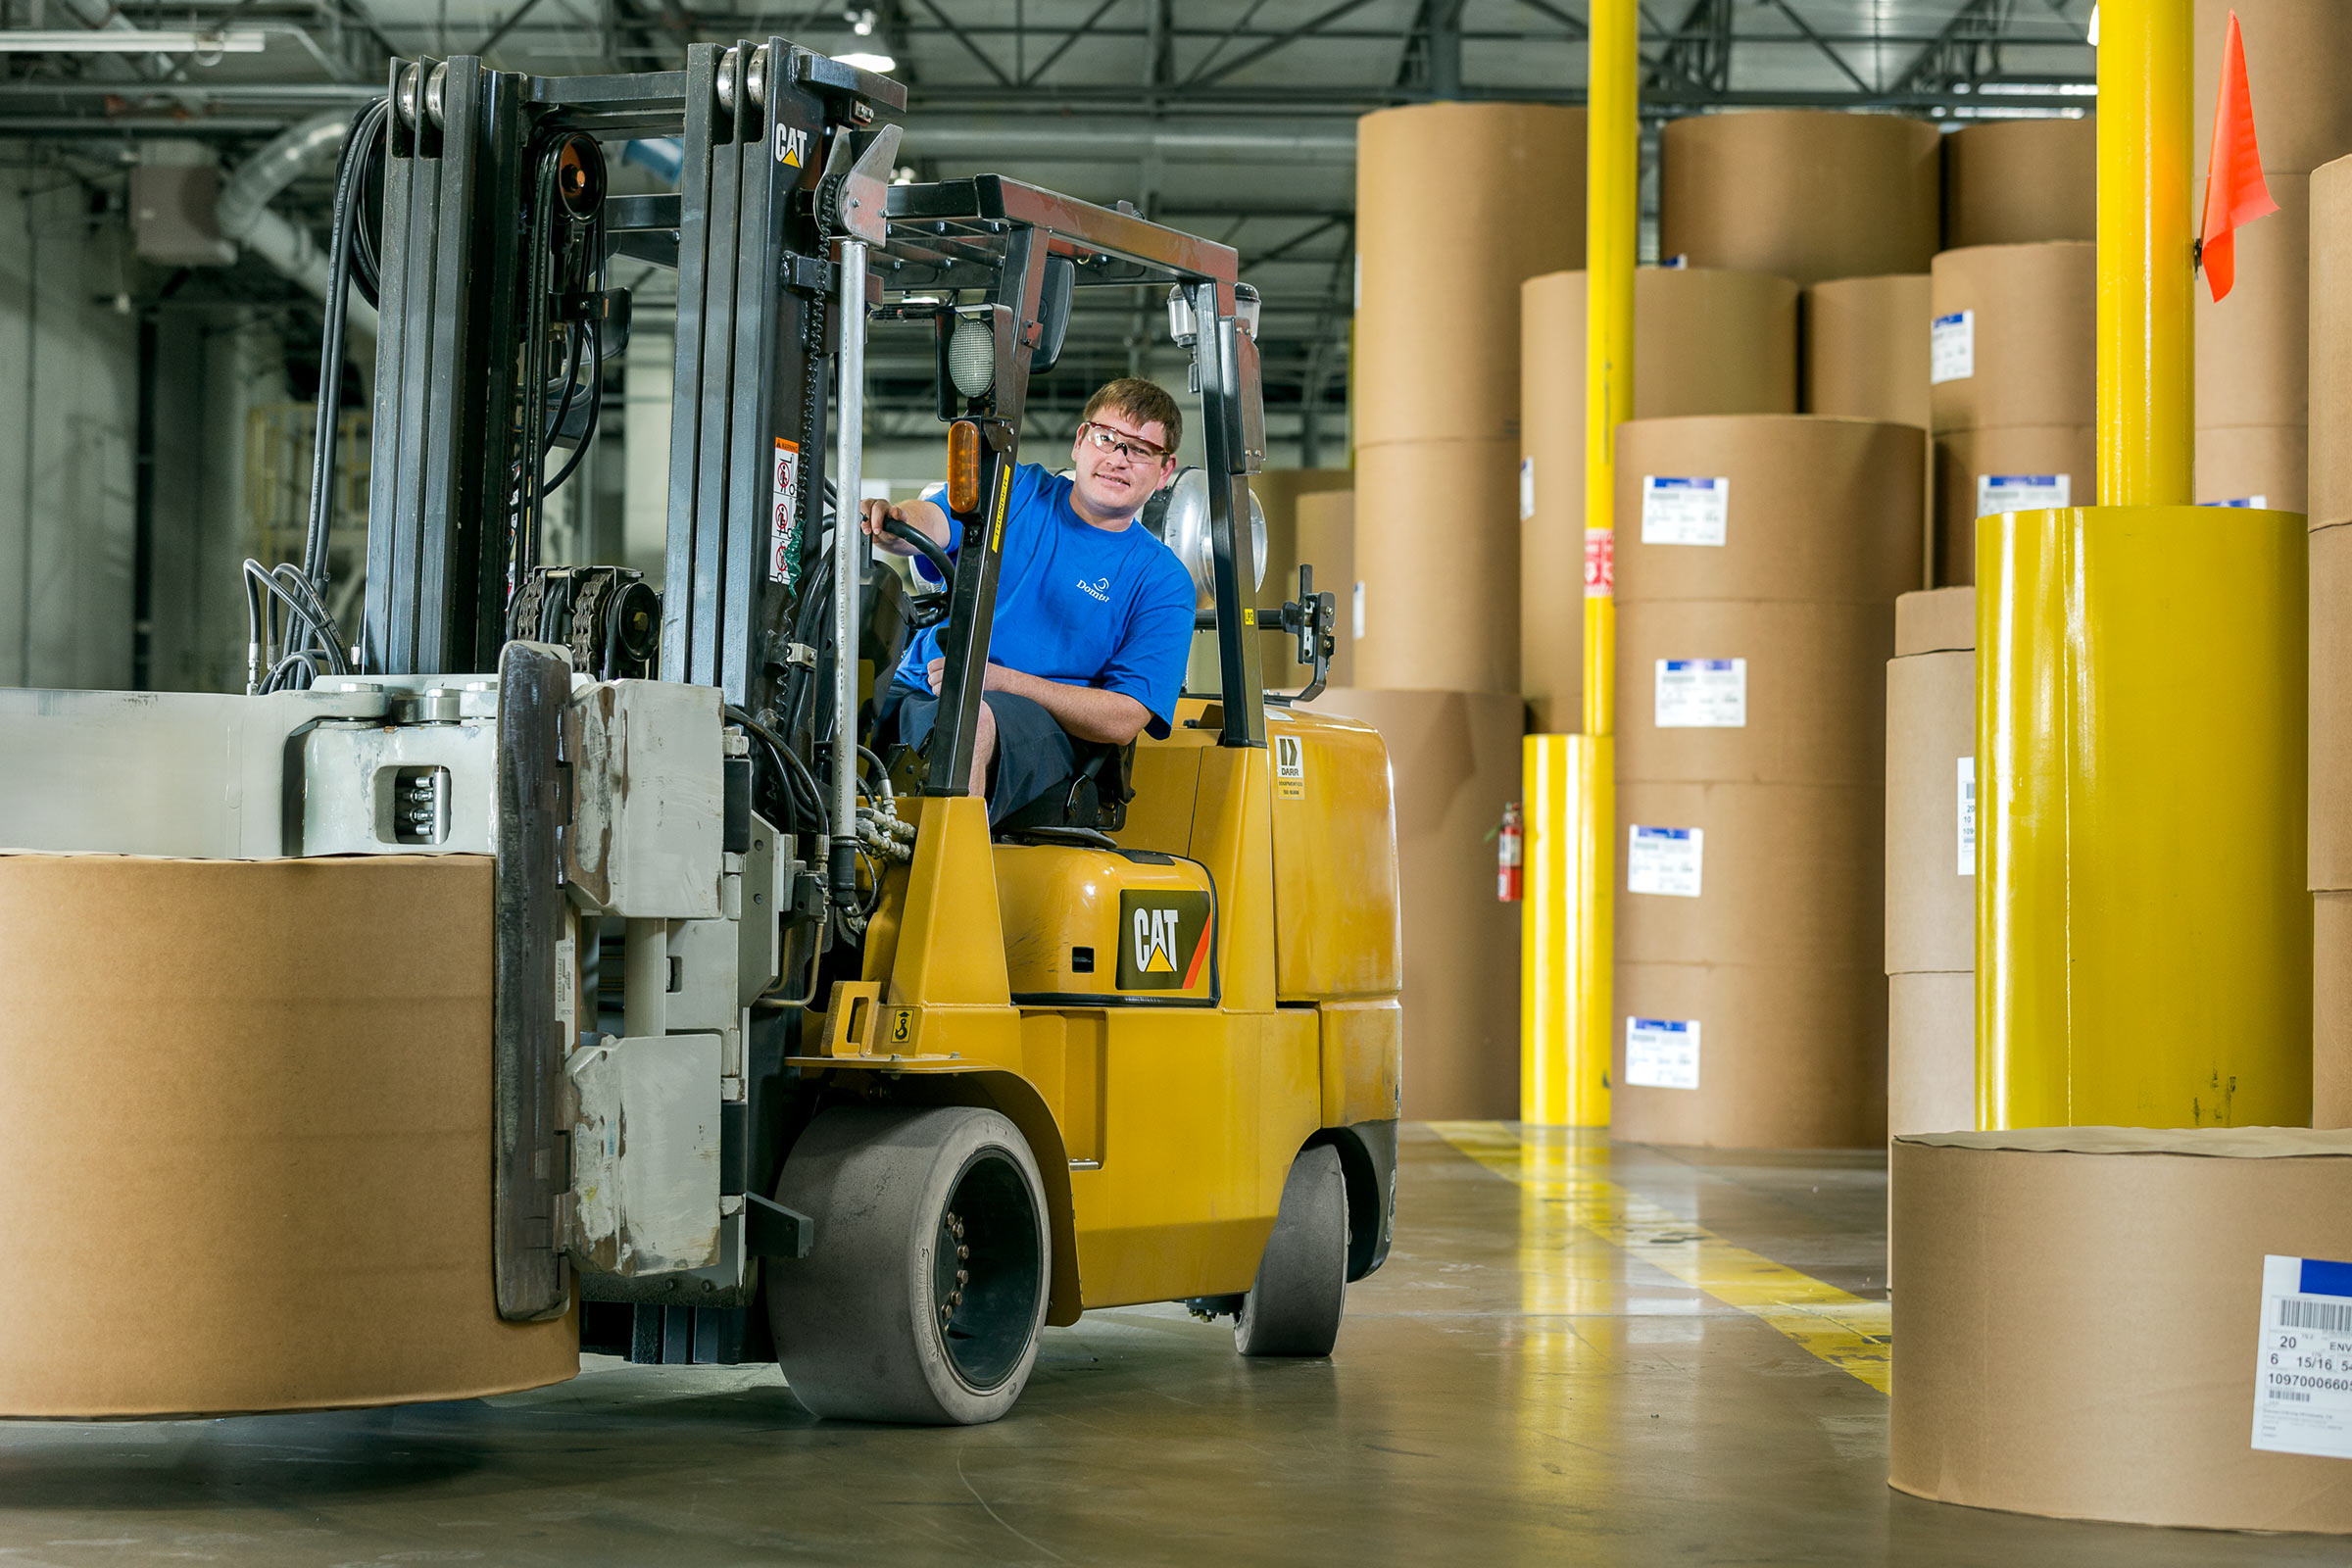 Forklift jobs hiring now in dallas tx